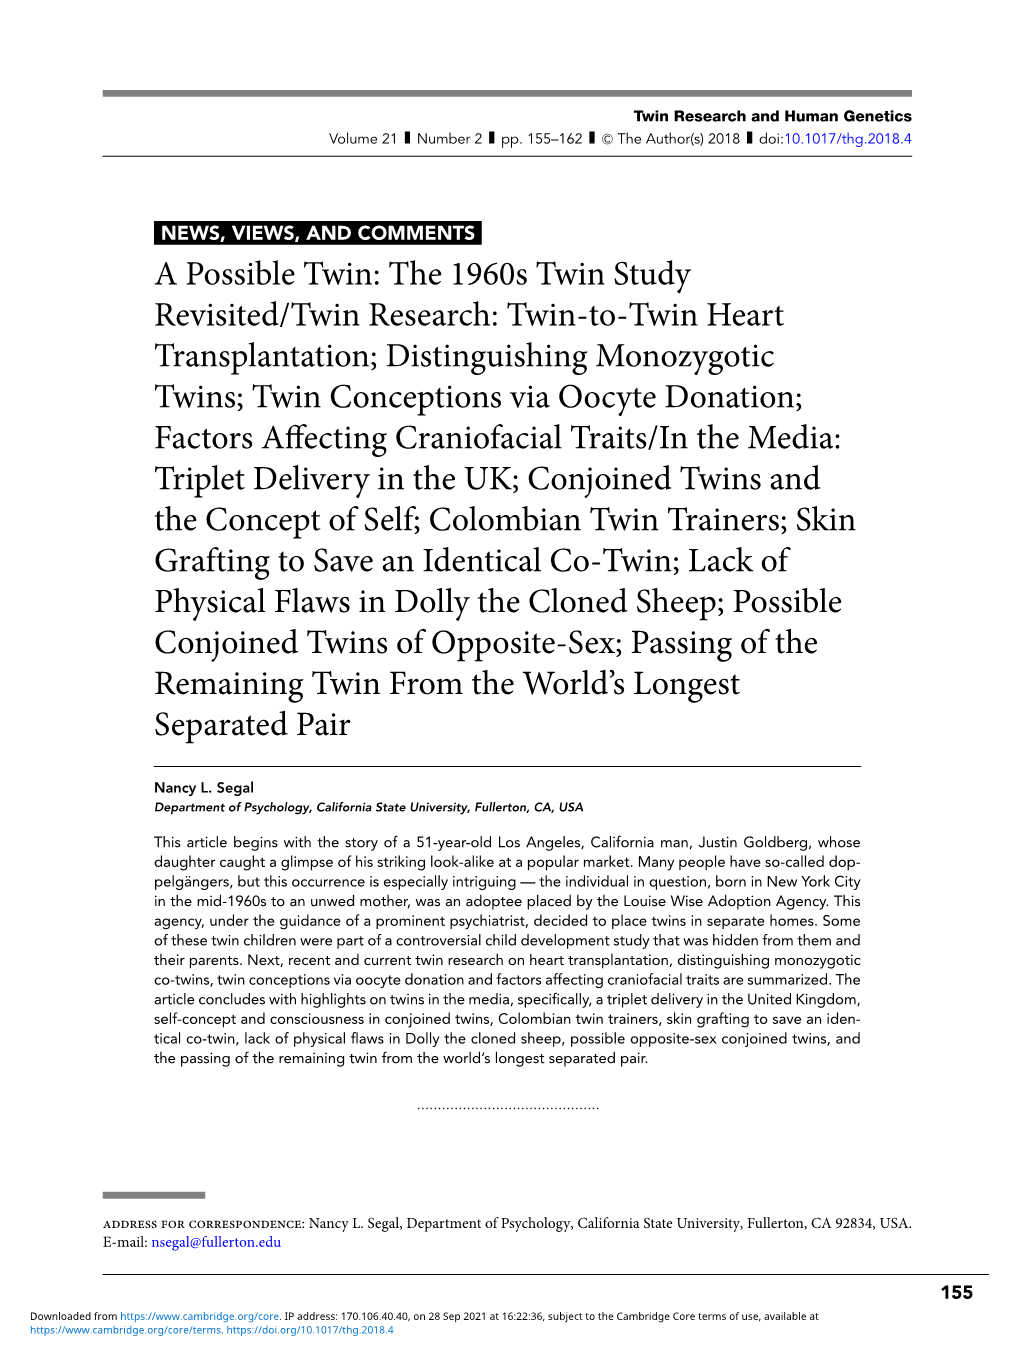 A Possible Twin: the 1960S Twin Study Revisited/Twin Research